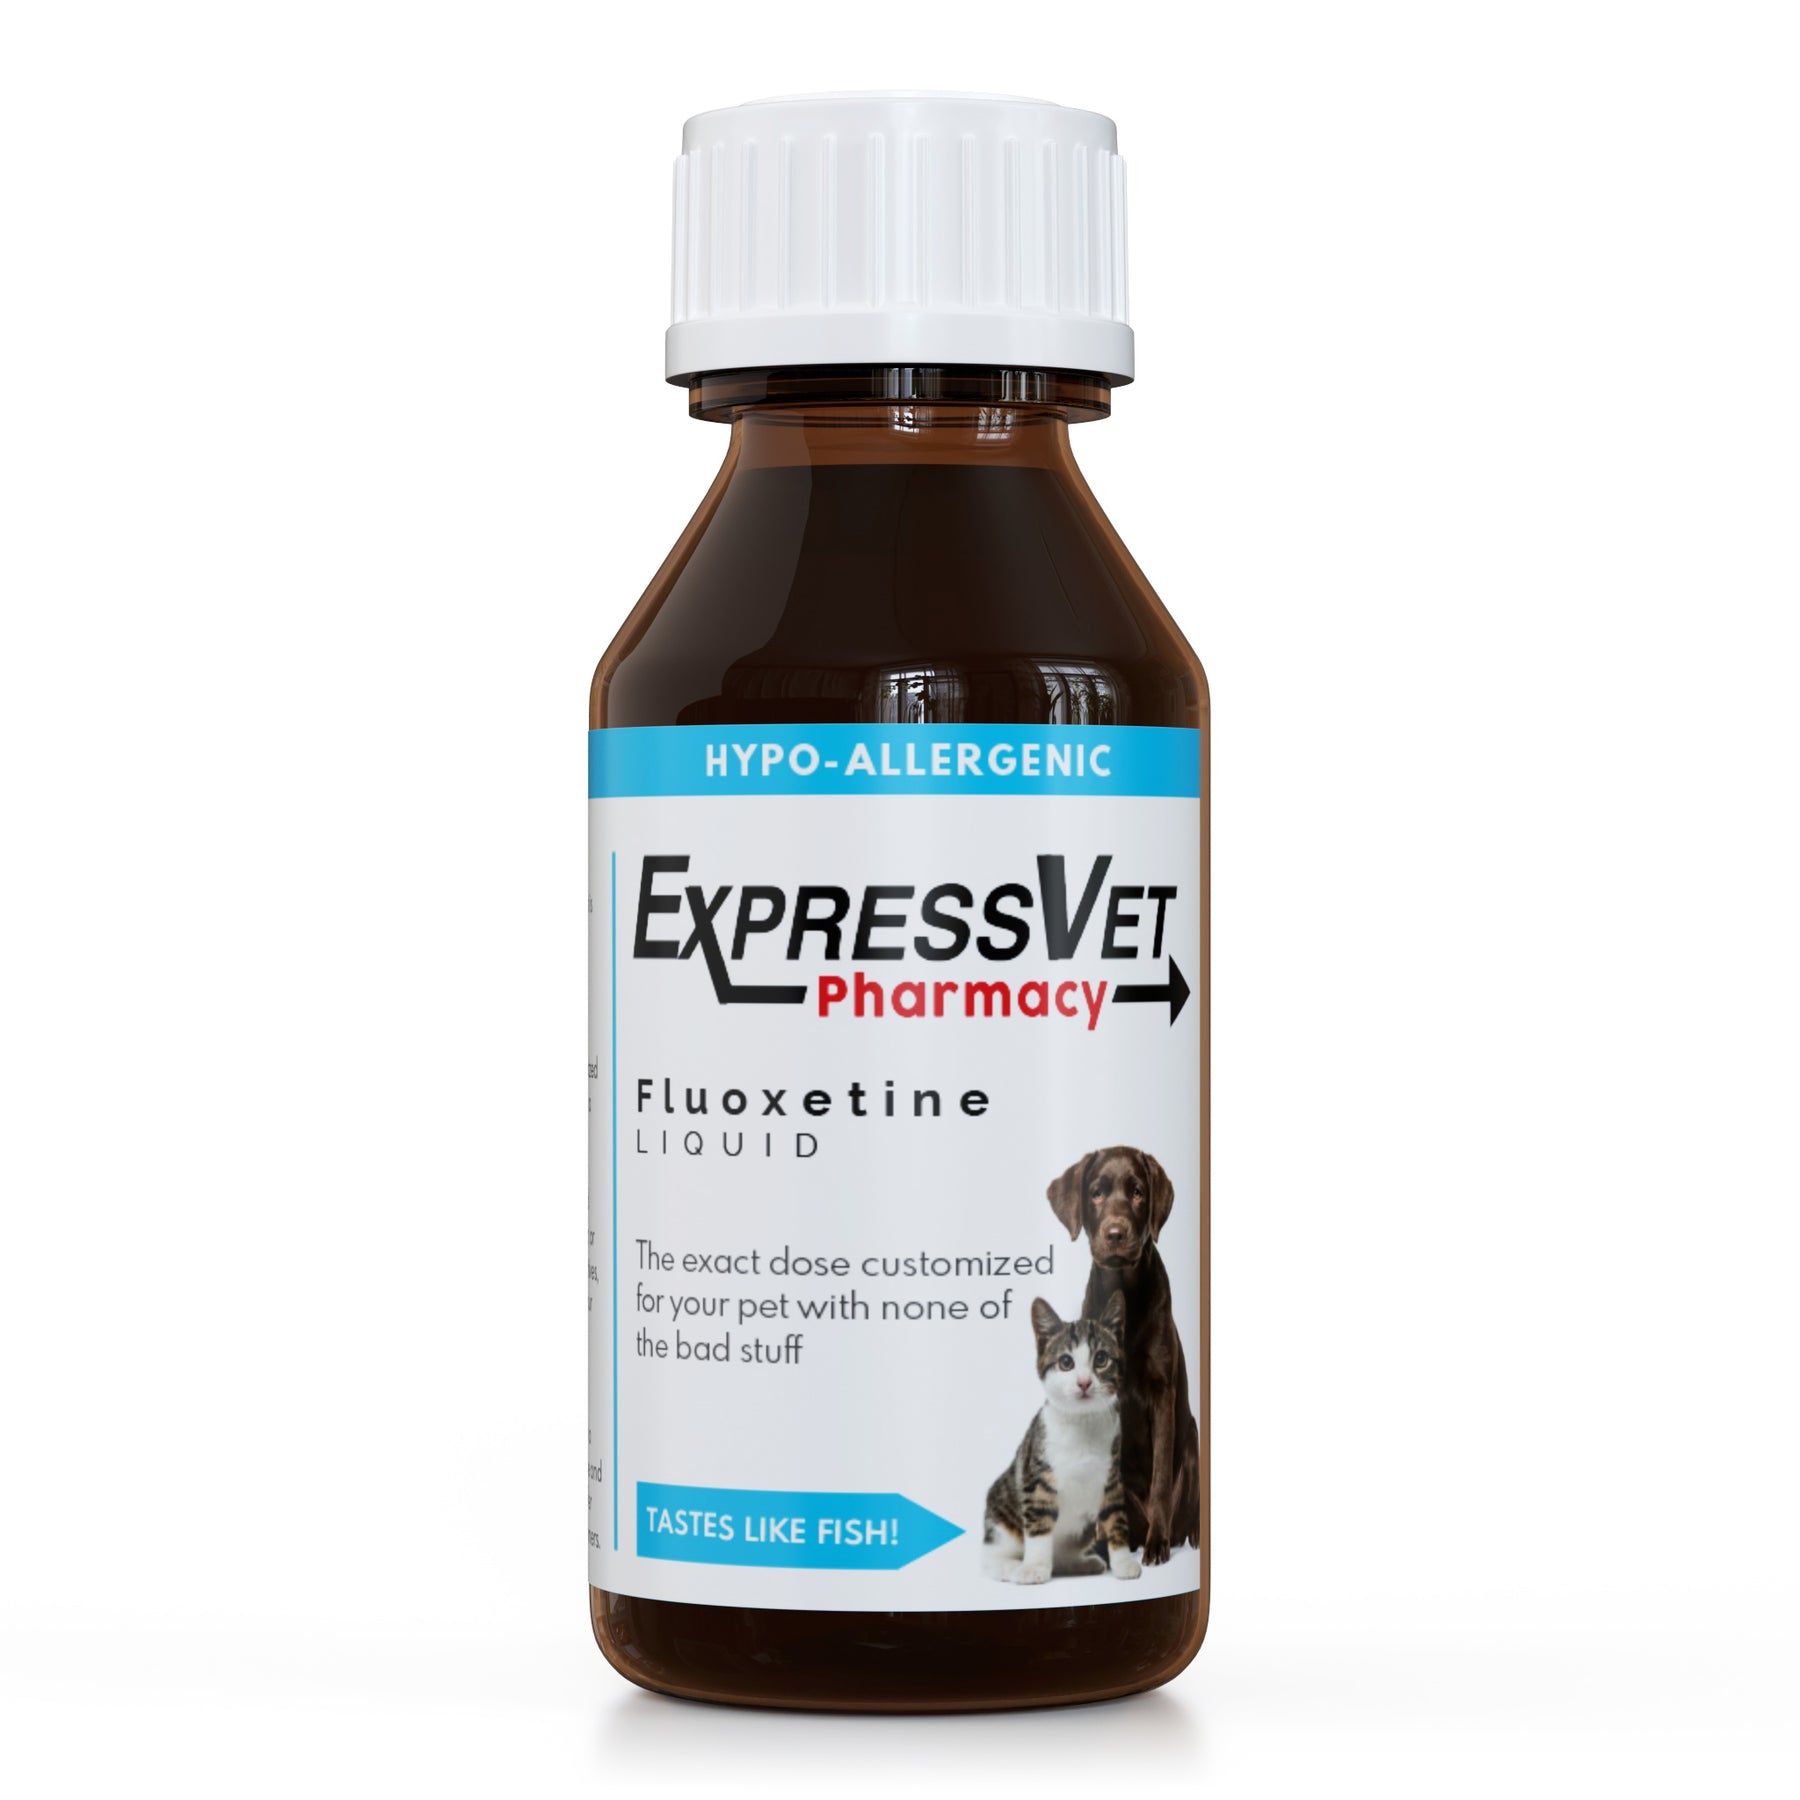 Prescription Medication For Your Pets At Much Lower Prices